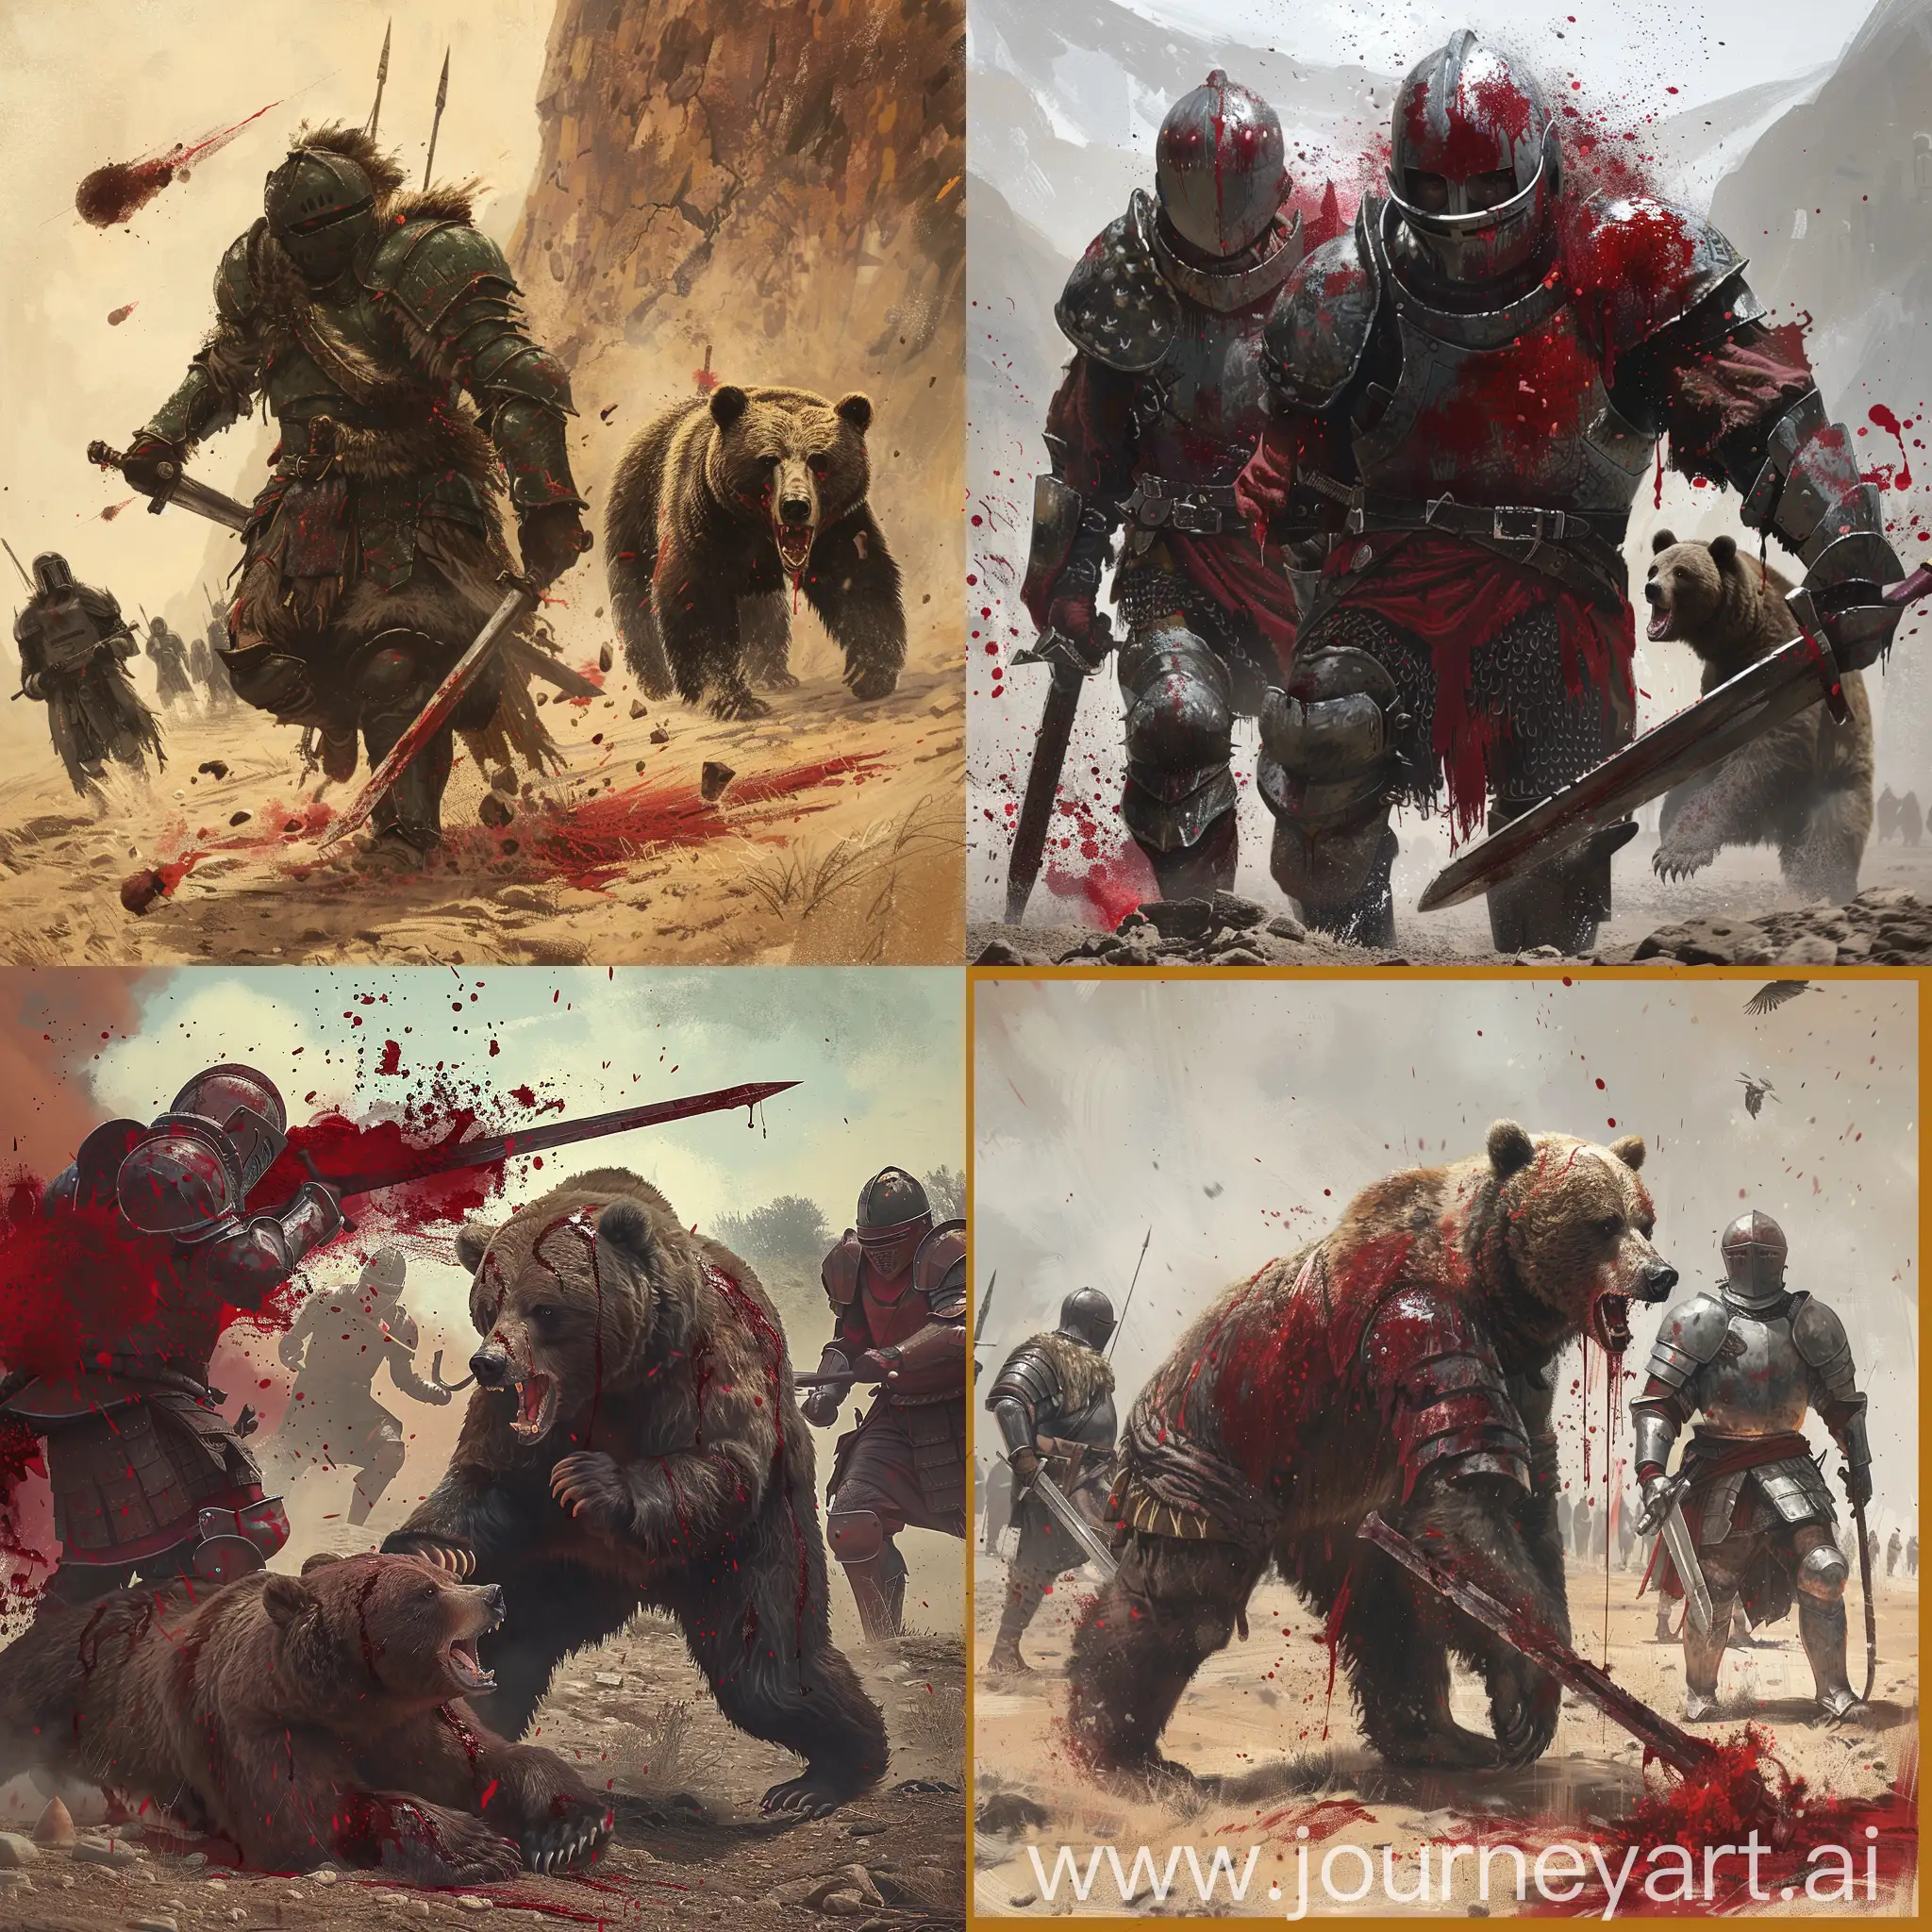 Armored-Warriors-in-a-Desolate-Wasteland-Engaging-in-a-Fierce-Bear-Hunt